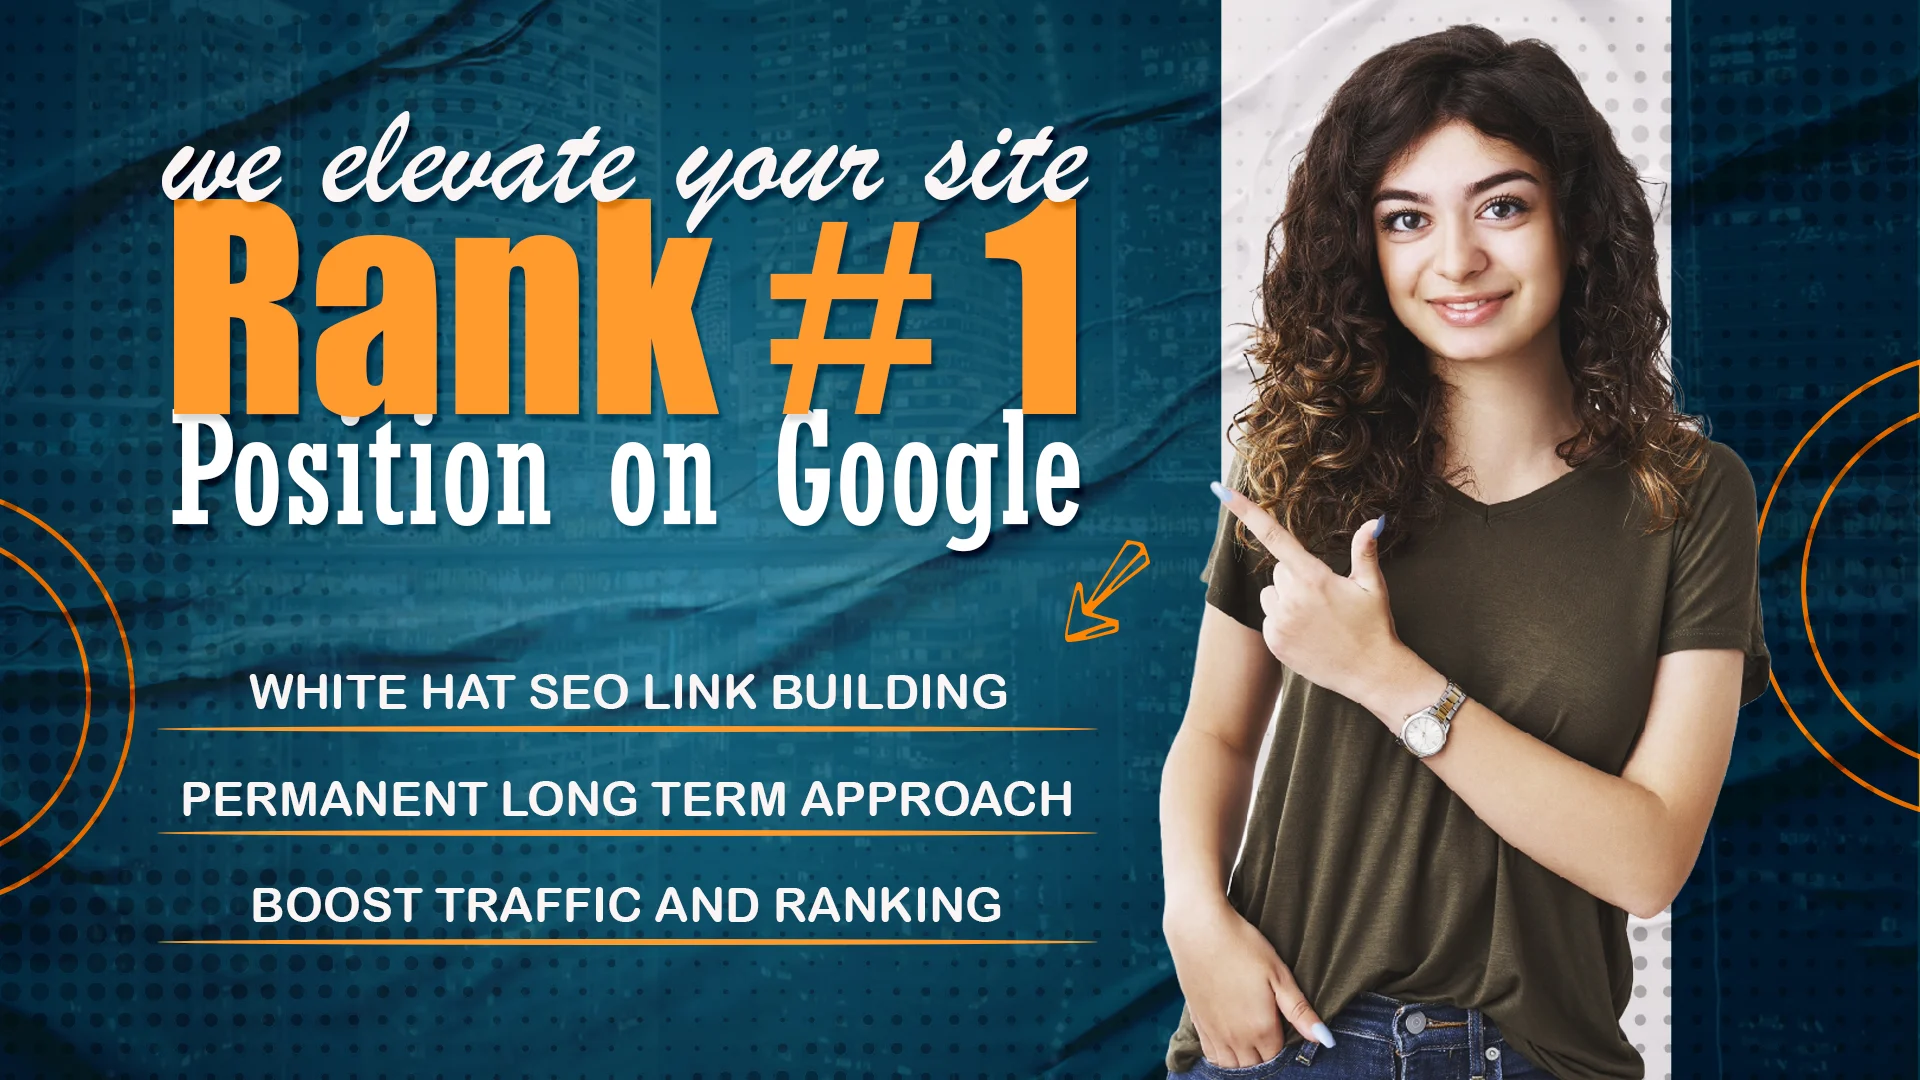 All In One Manual SEO Backllinks to boost your site for Google 1 Ranking! Web 2.0, Guest Posts etc